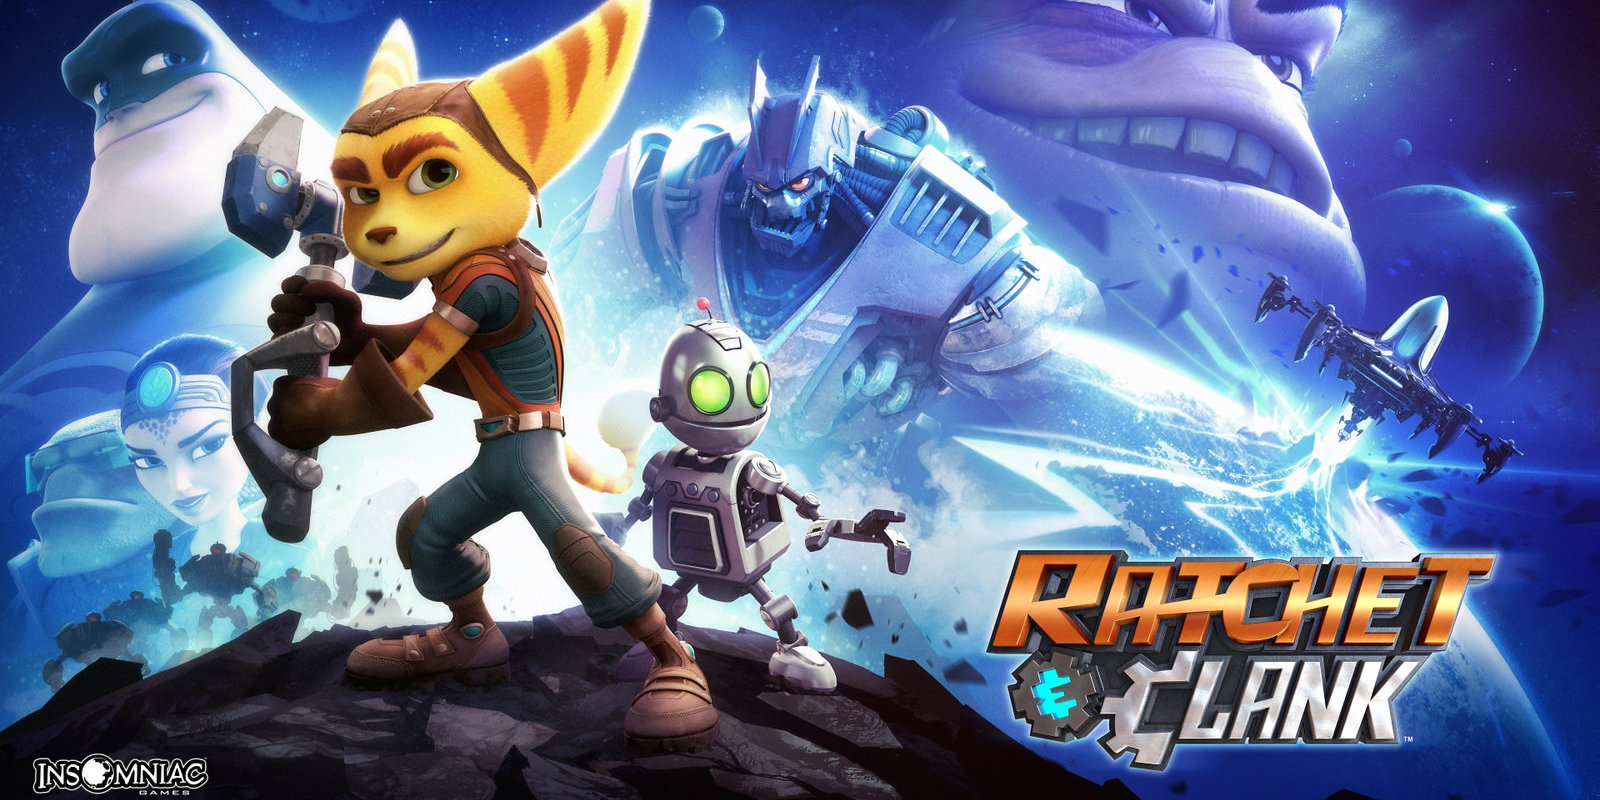 Ubestemt sprede Træde tilbage Games/Apps: Ratchet & Clank PS4 $27, Xbox One 4 game bundle w/ extra  controller $299, iOS freebies, more